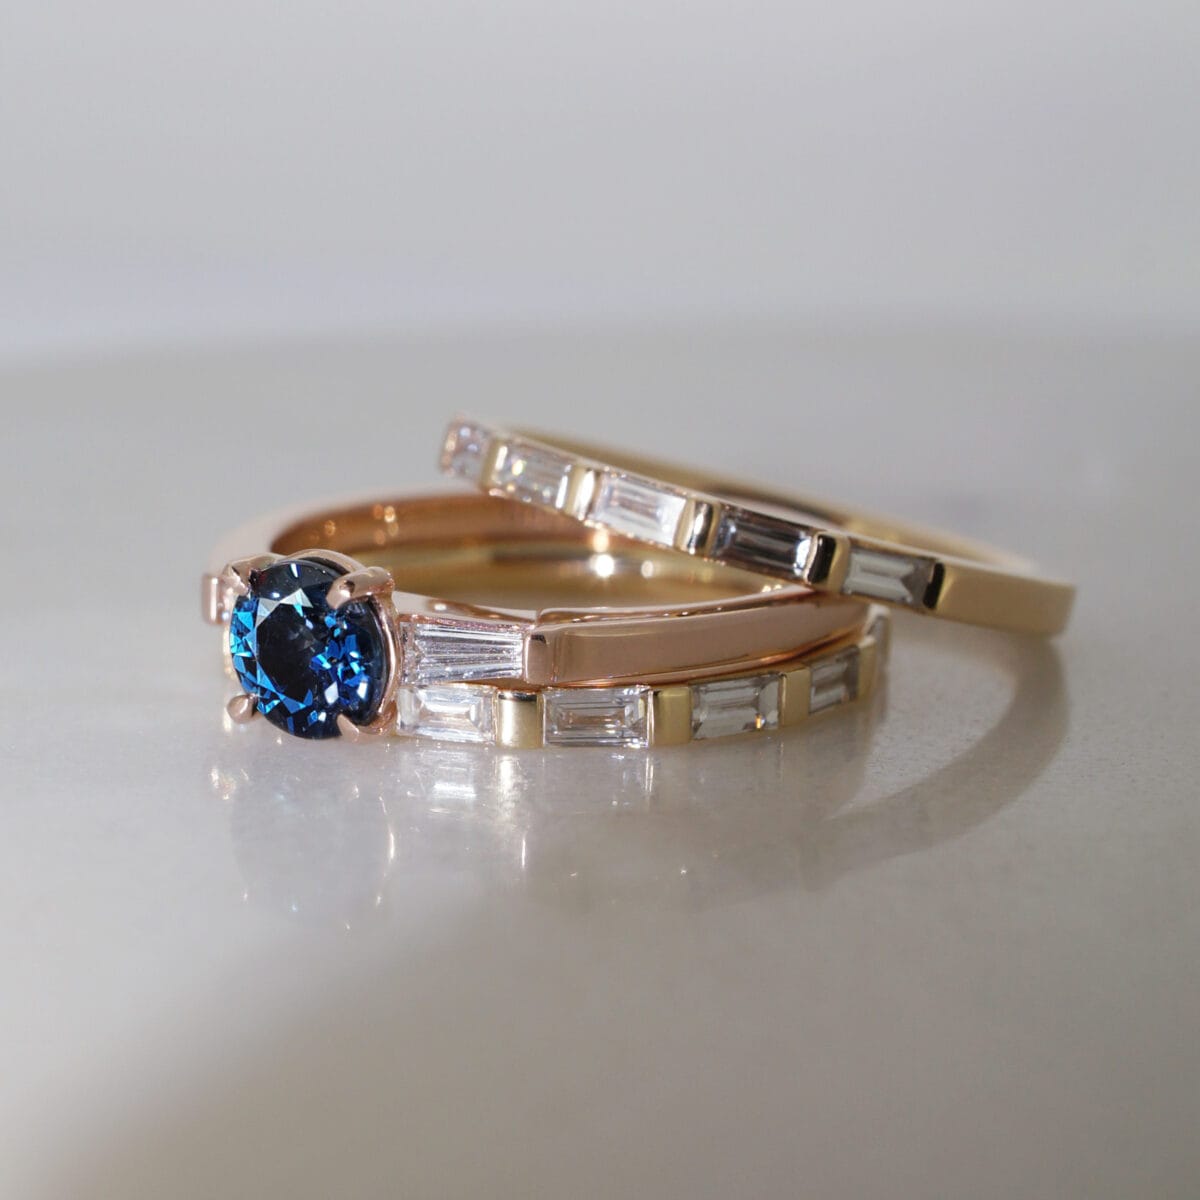 A wedding ring set with a sapphire.